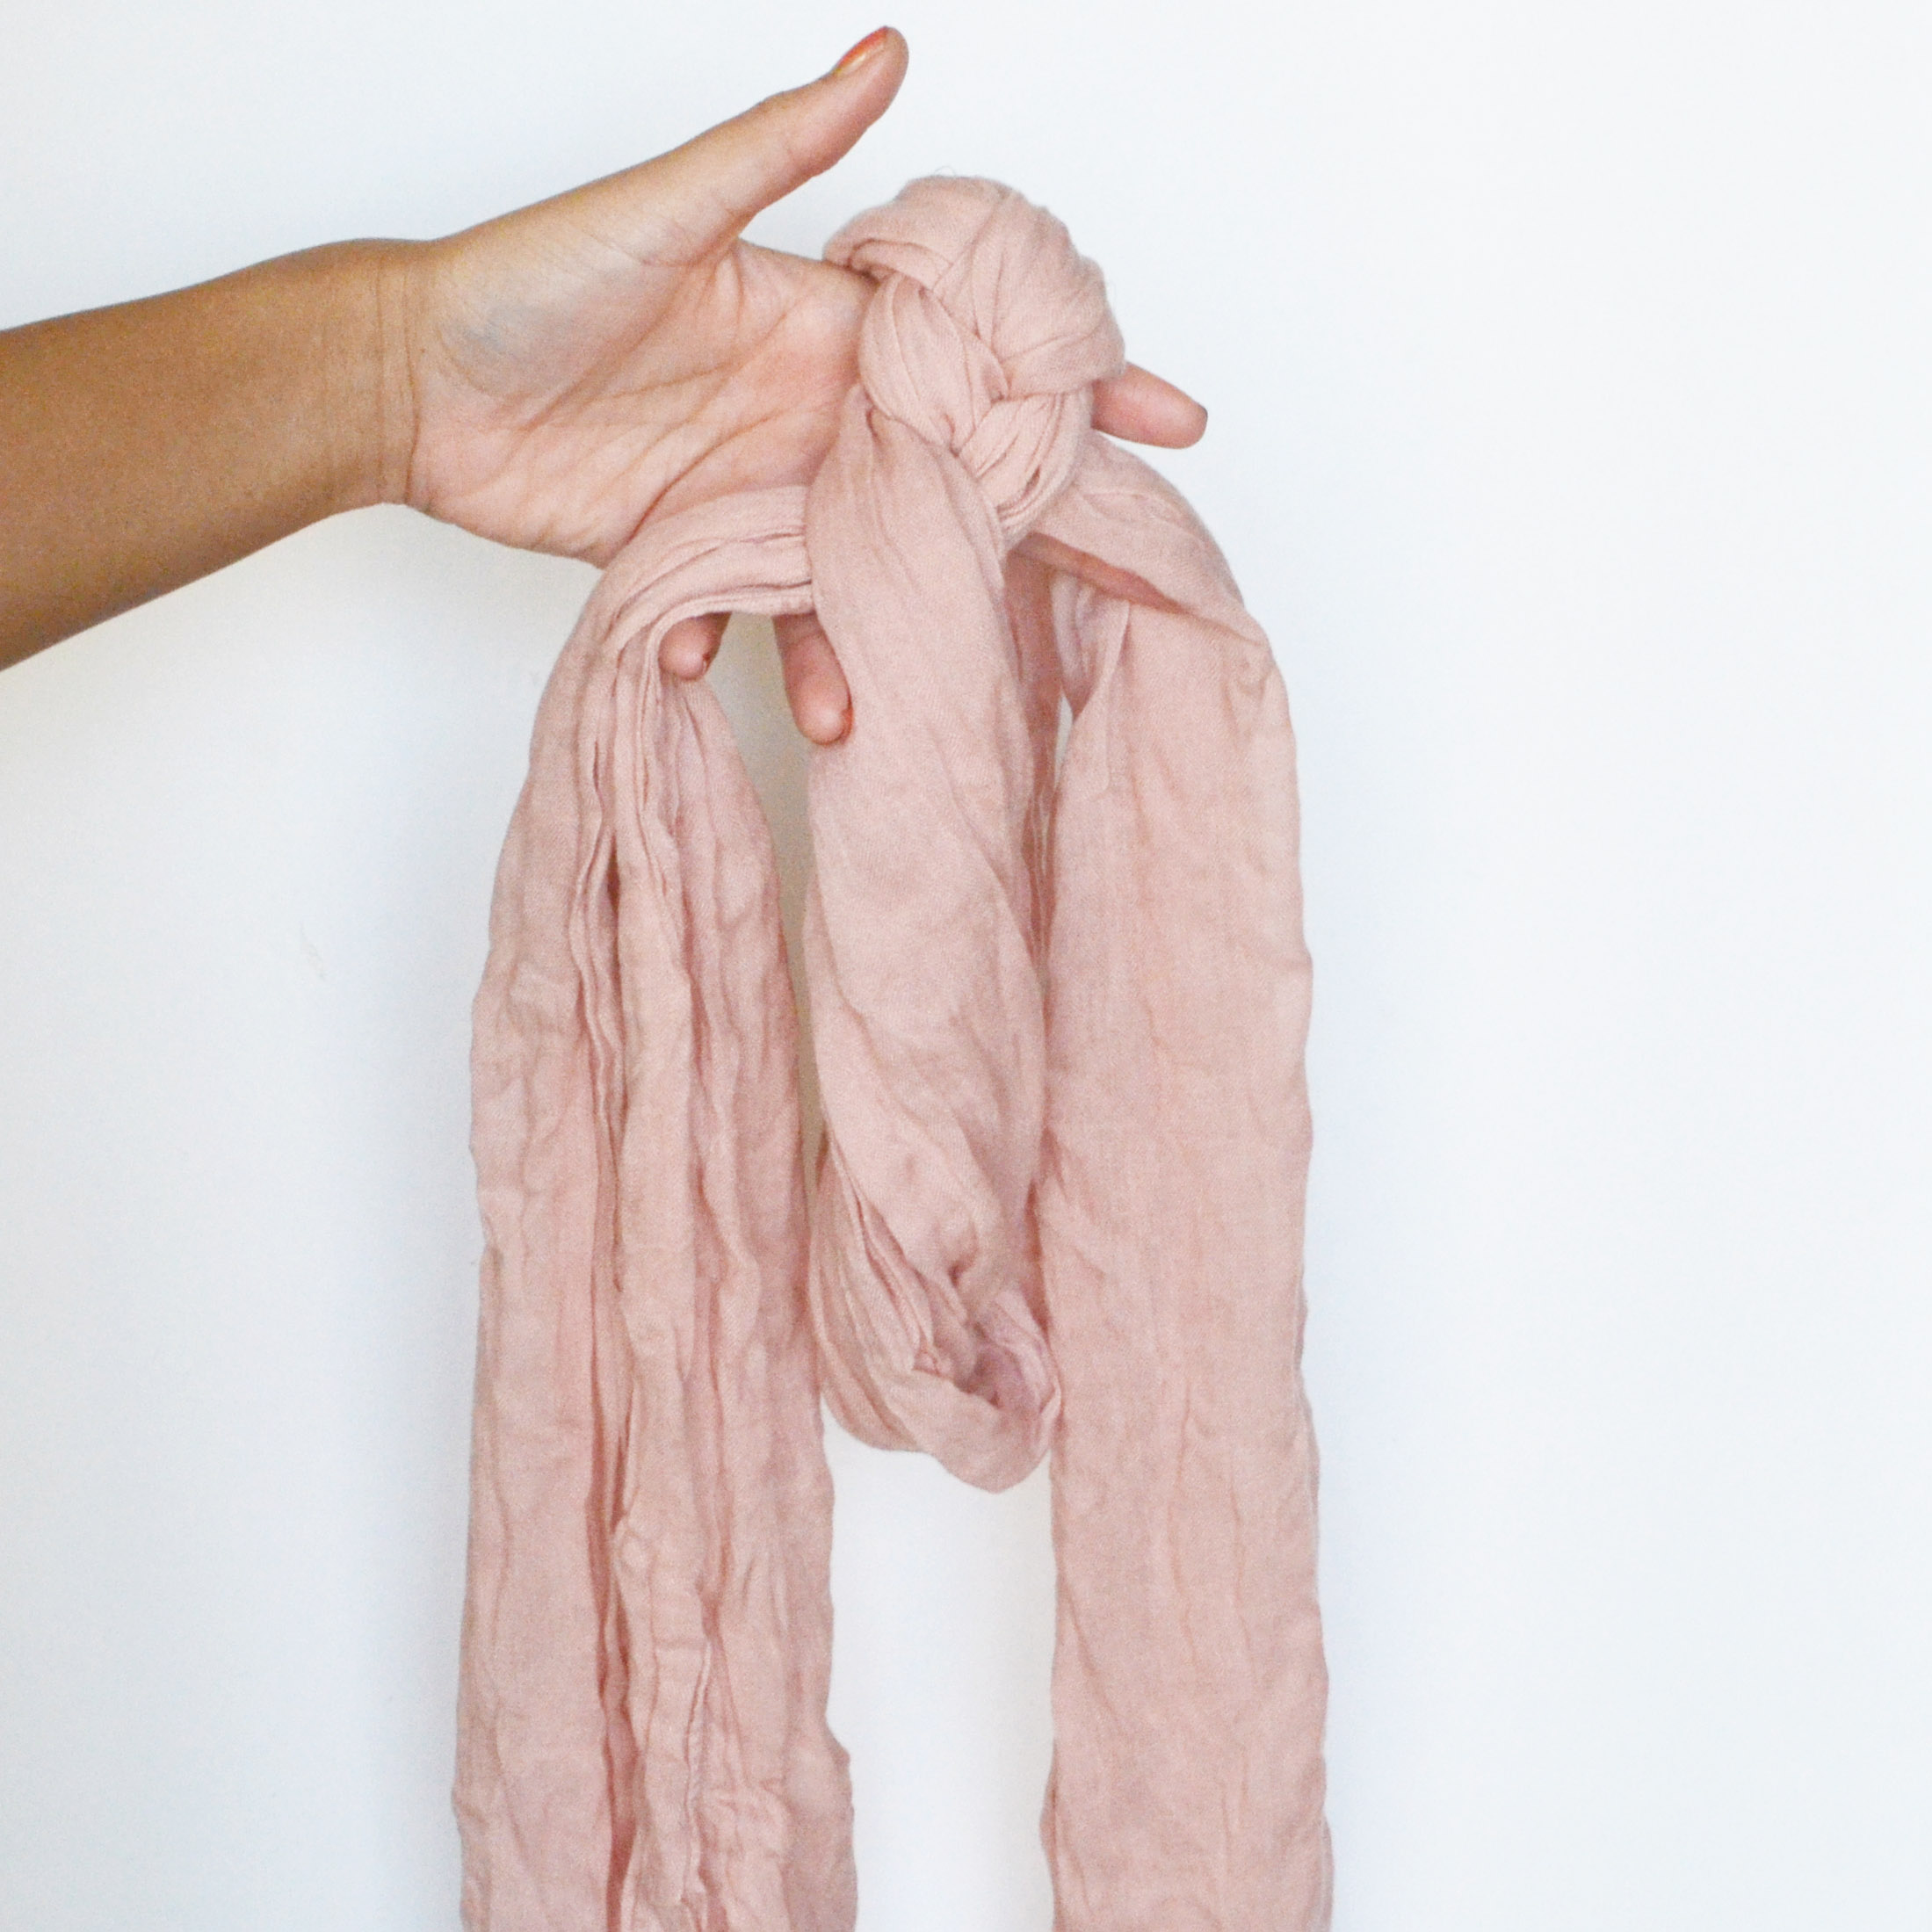 How to braided scarf spark and chemistry 5